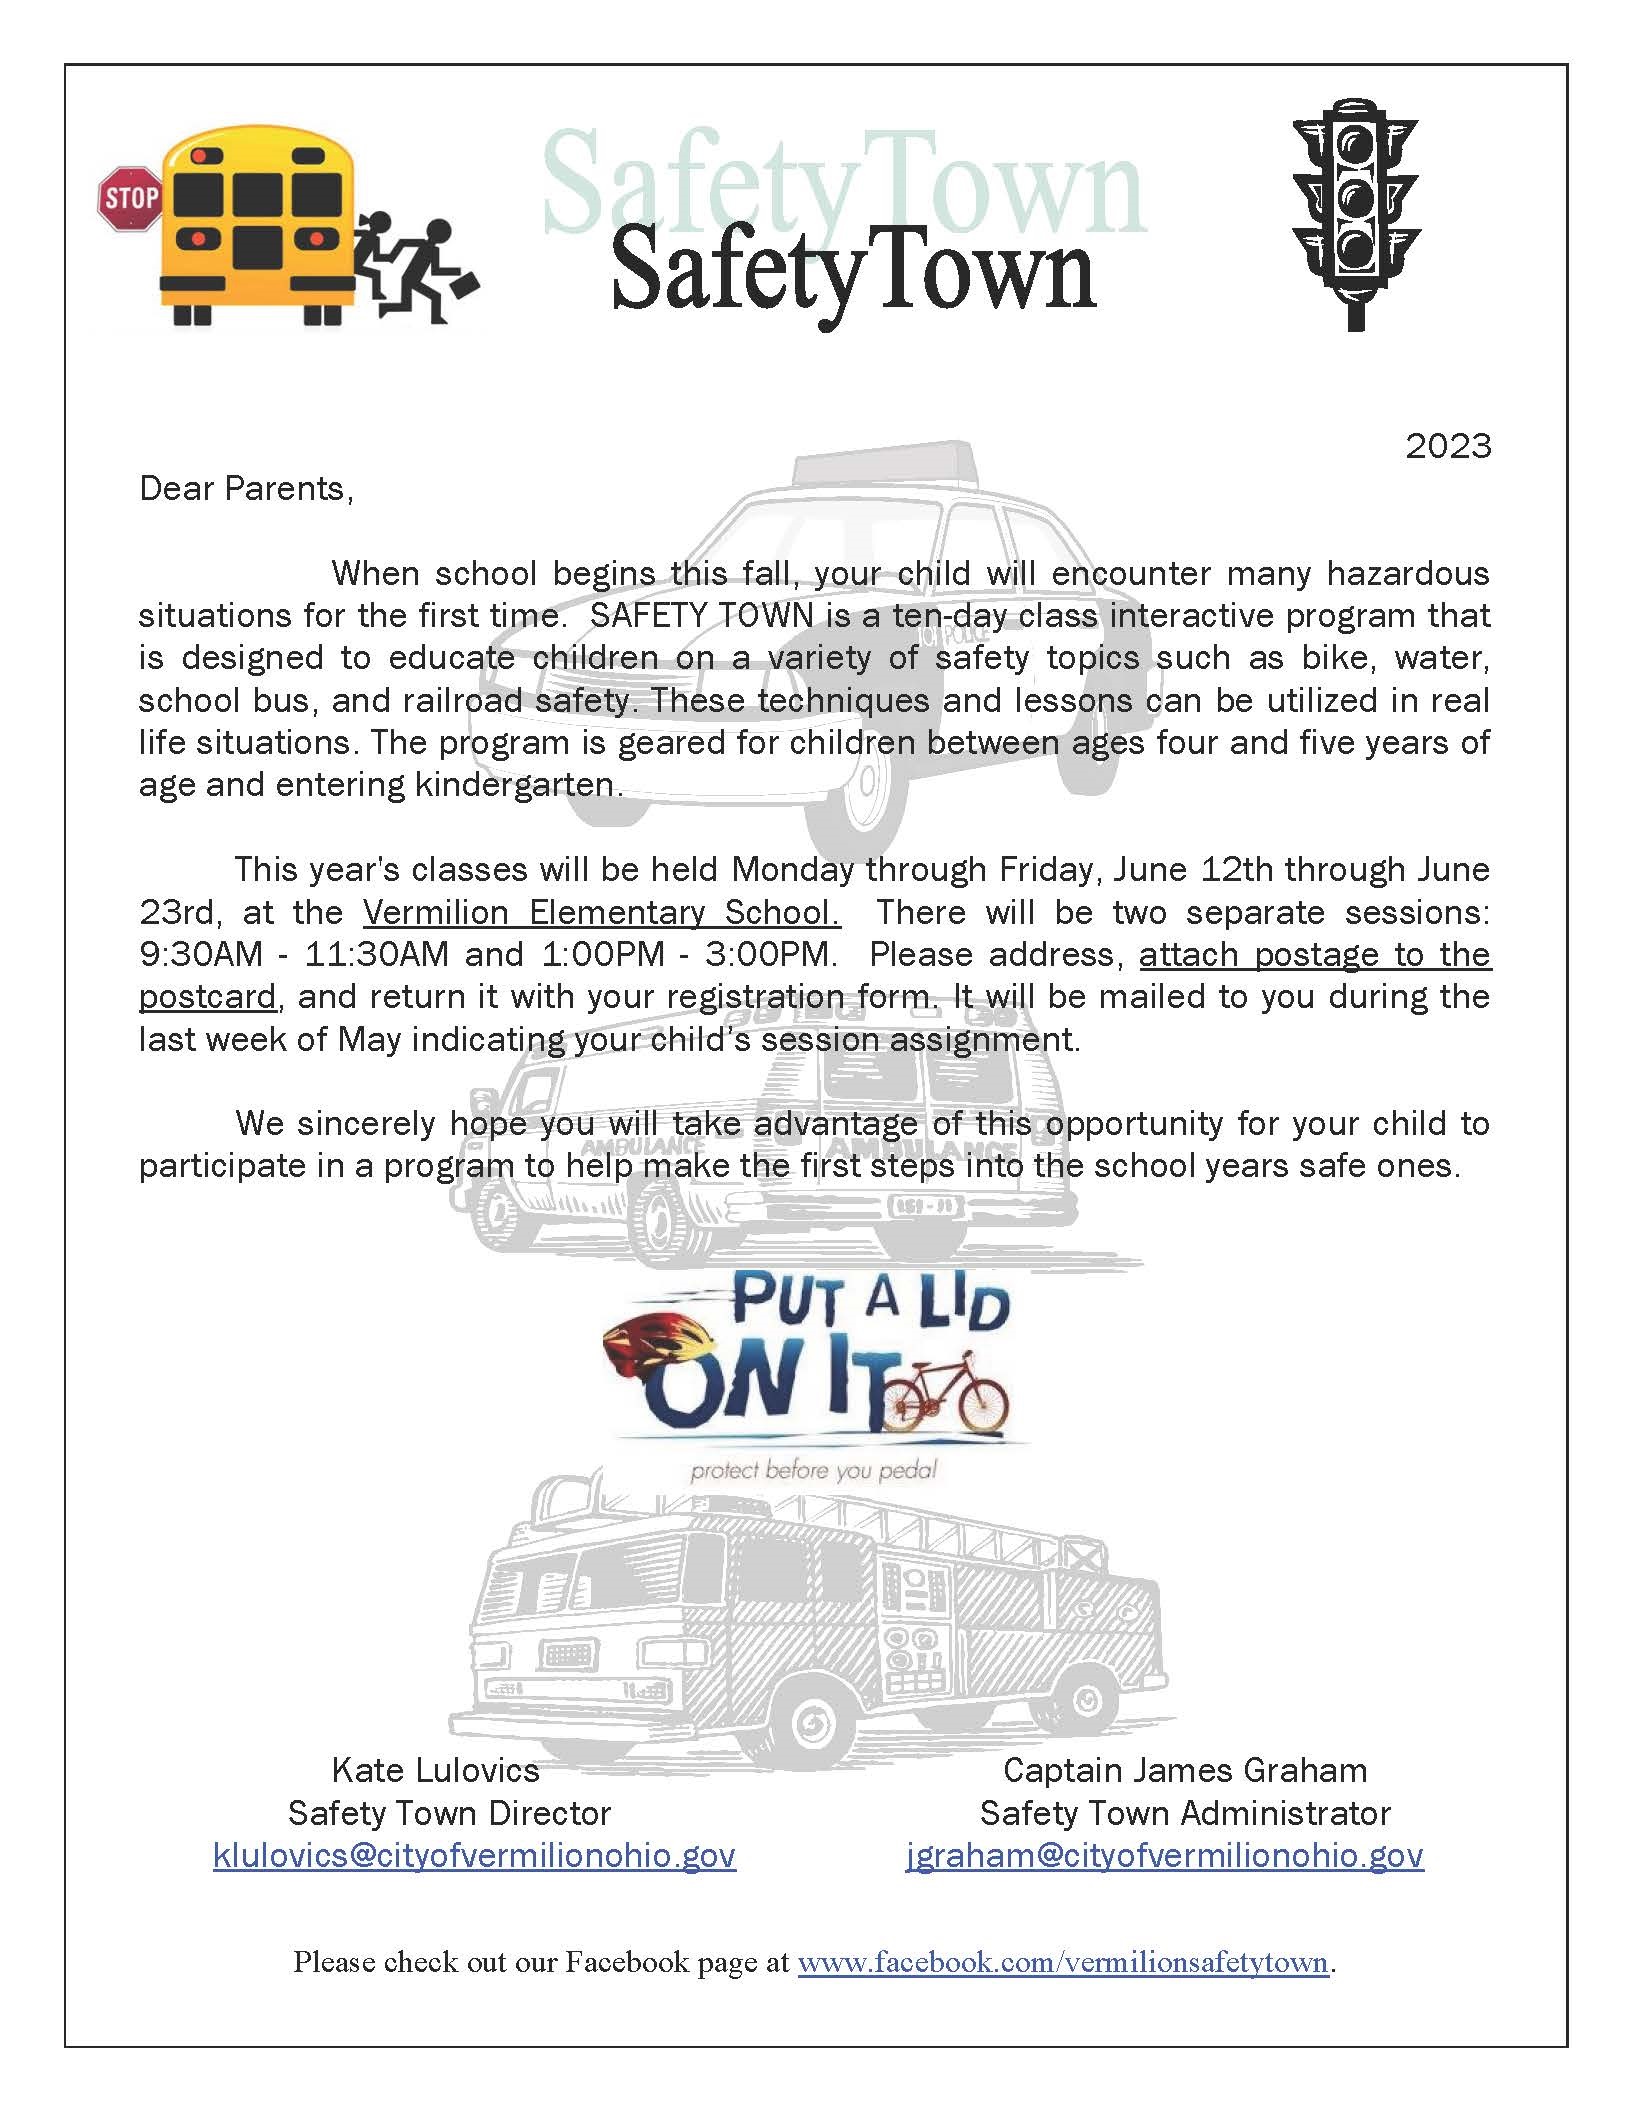 Safety-Town-Welcome-Letter-2023-jpg.jpg